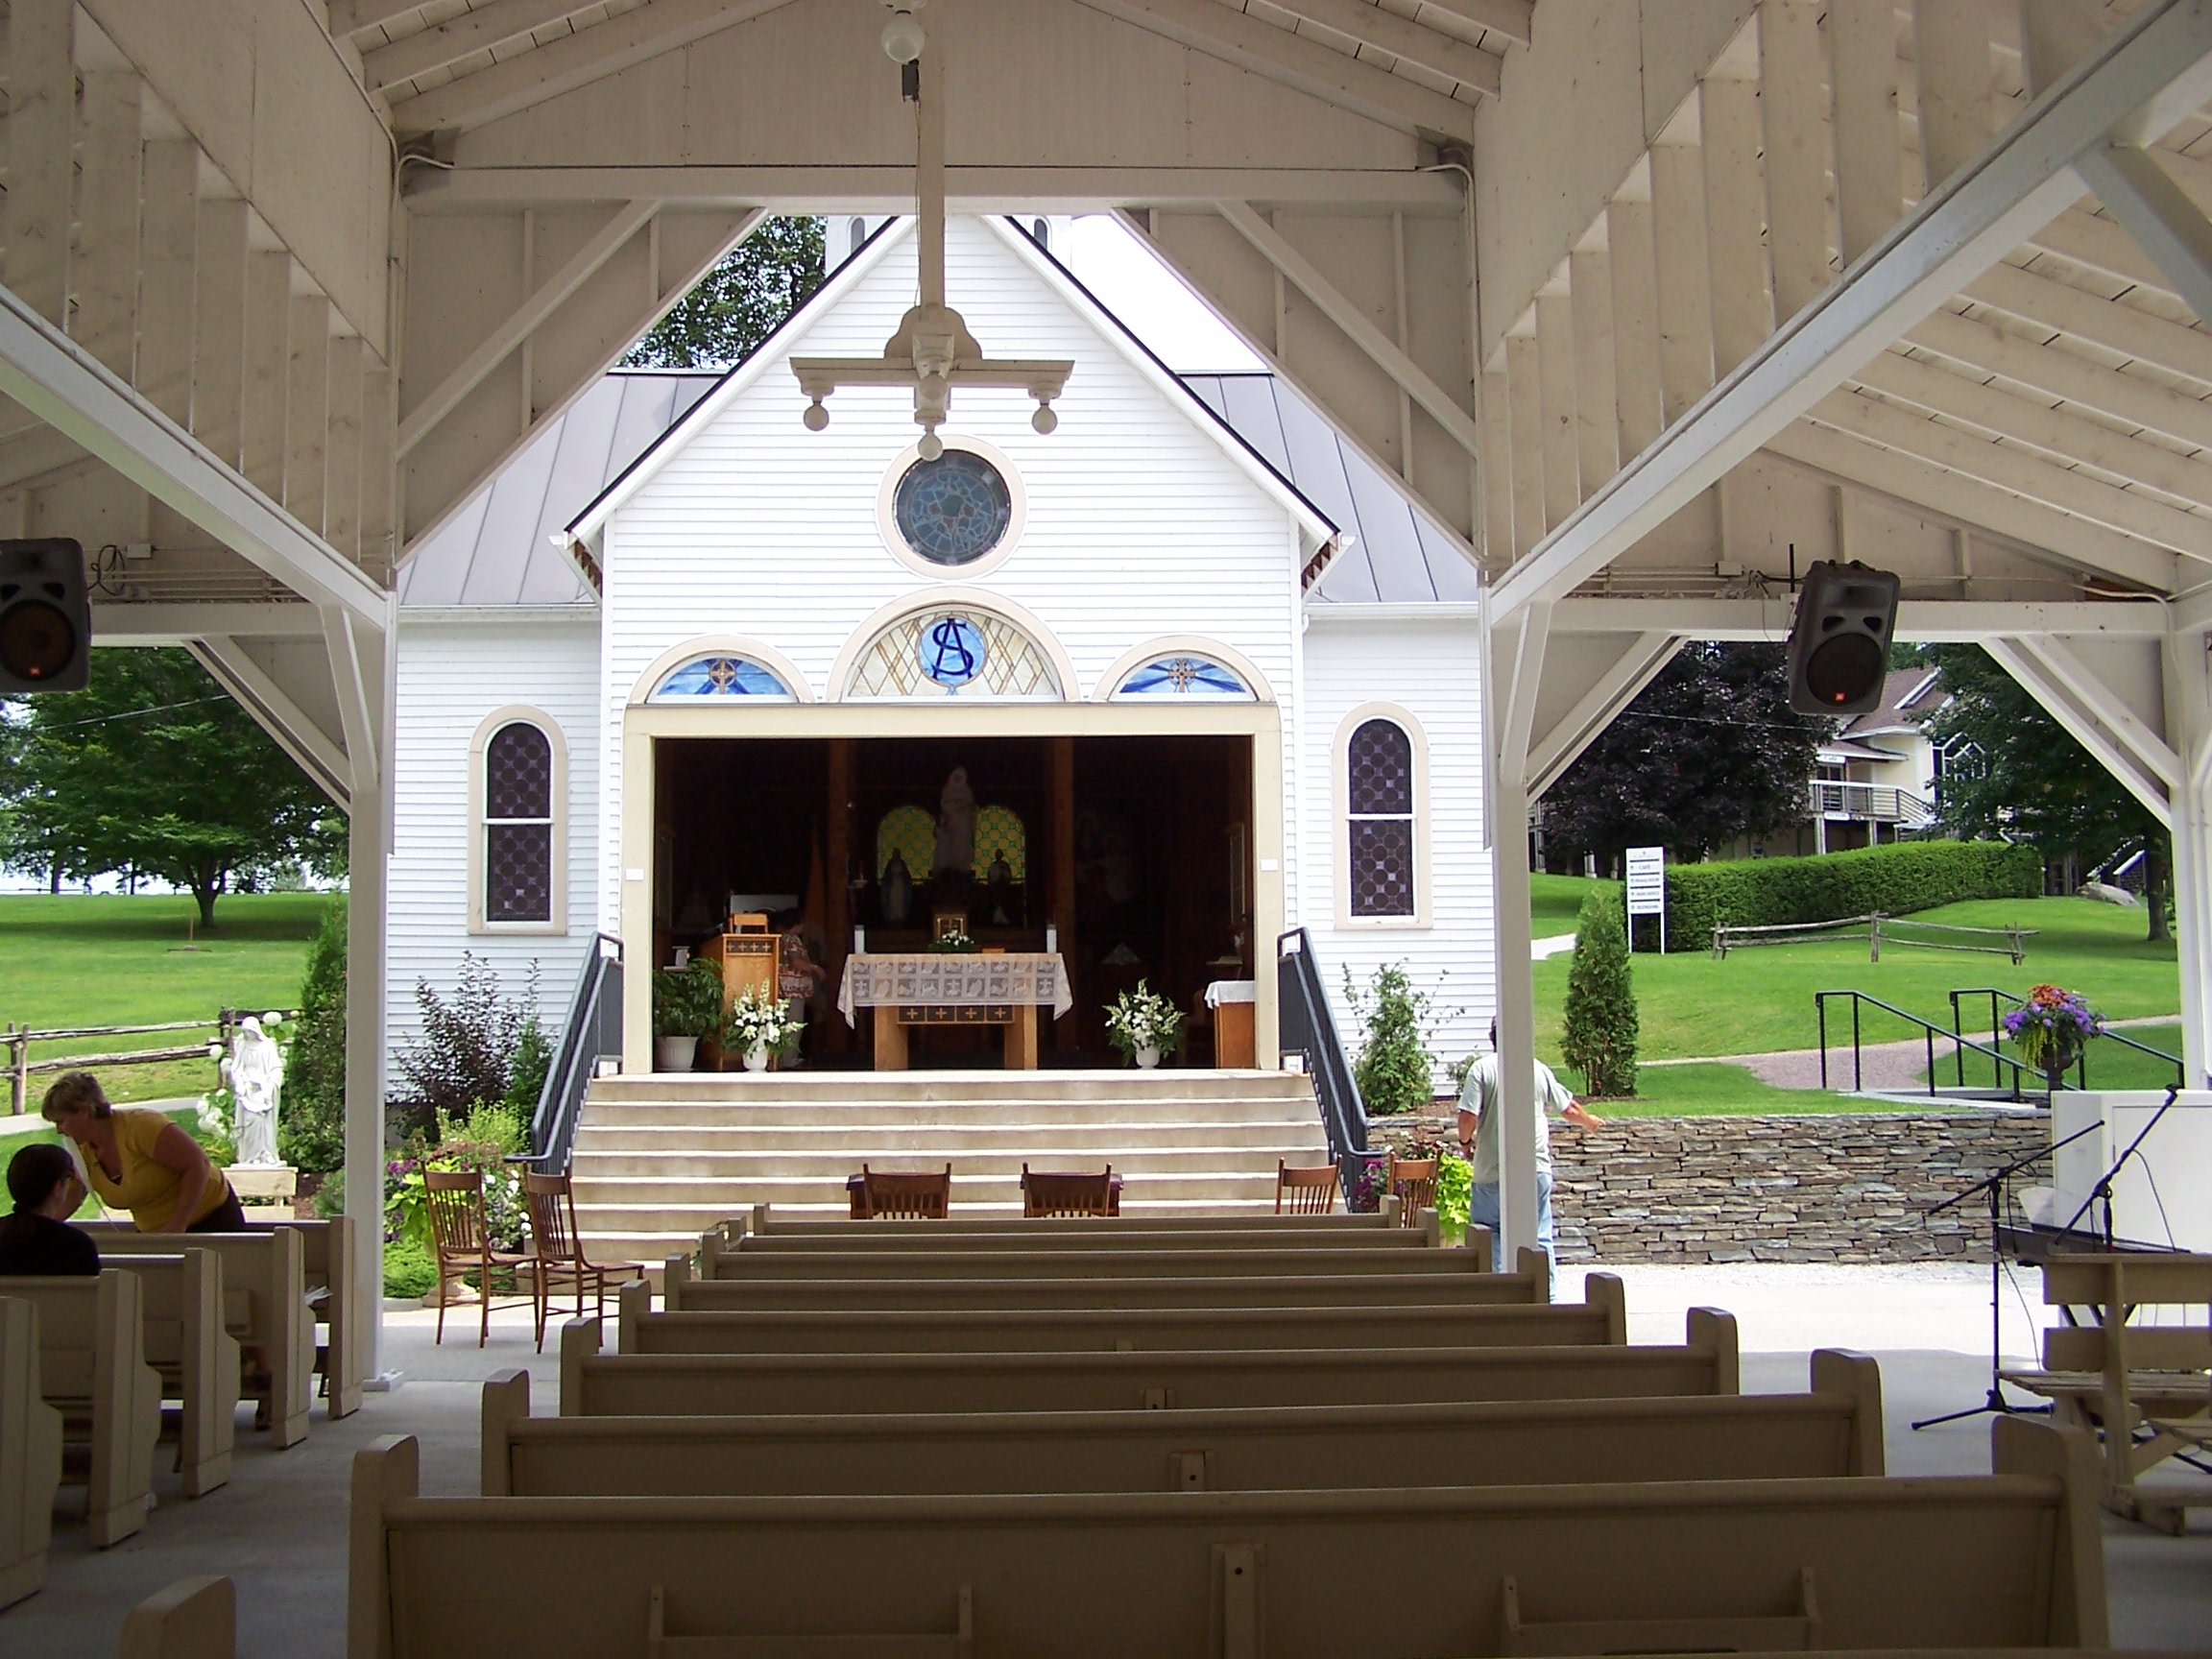 Saint Anne's Shrine is located on Isle LaMotte, a quiet island on Lake Champlain in Vermont. It was developed by the Society of Saint Edmund and has been maintained by them for 100 years..